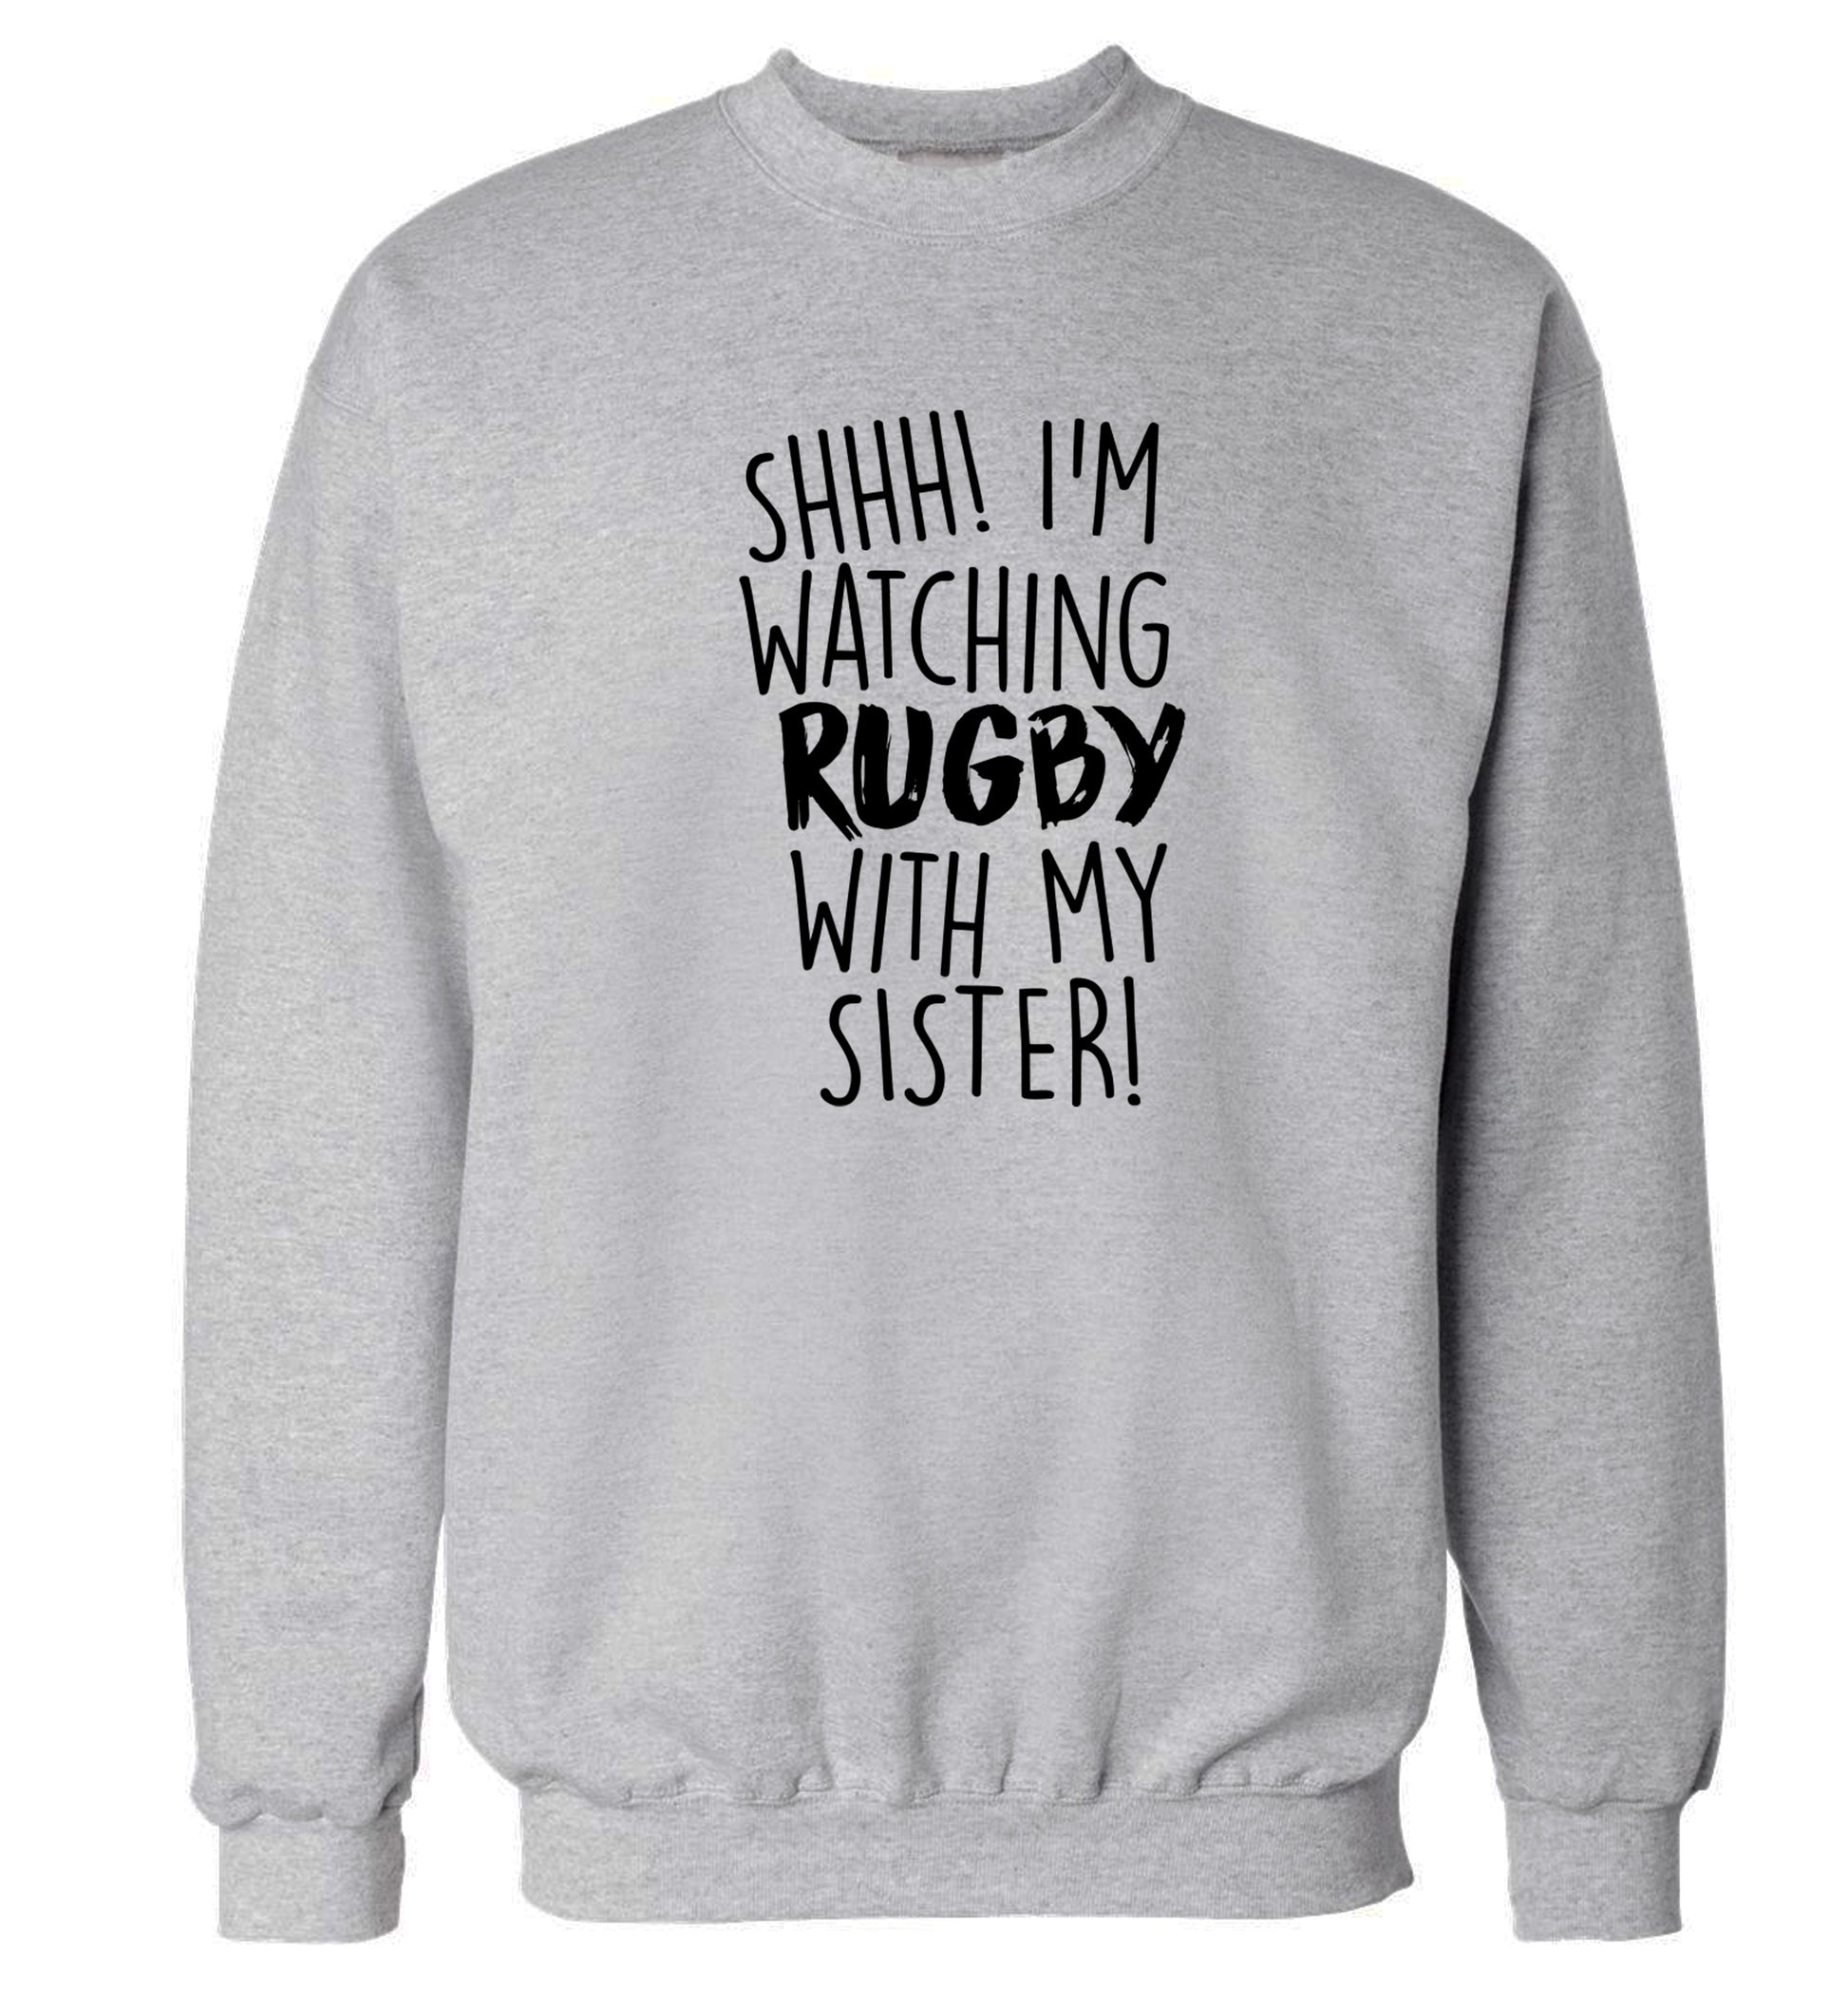 Shh... I'm watching rugby with my sister Adult's unisex grey Sweater 2XL